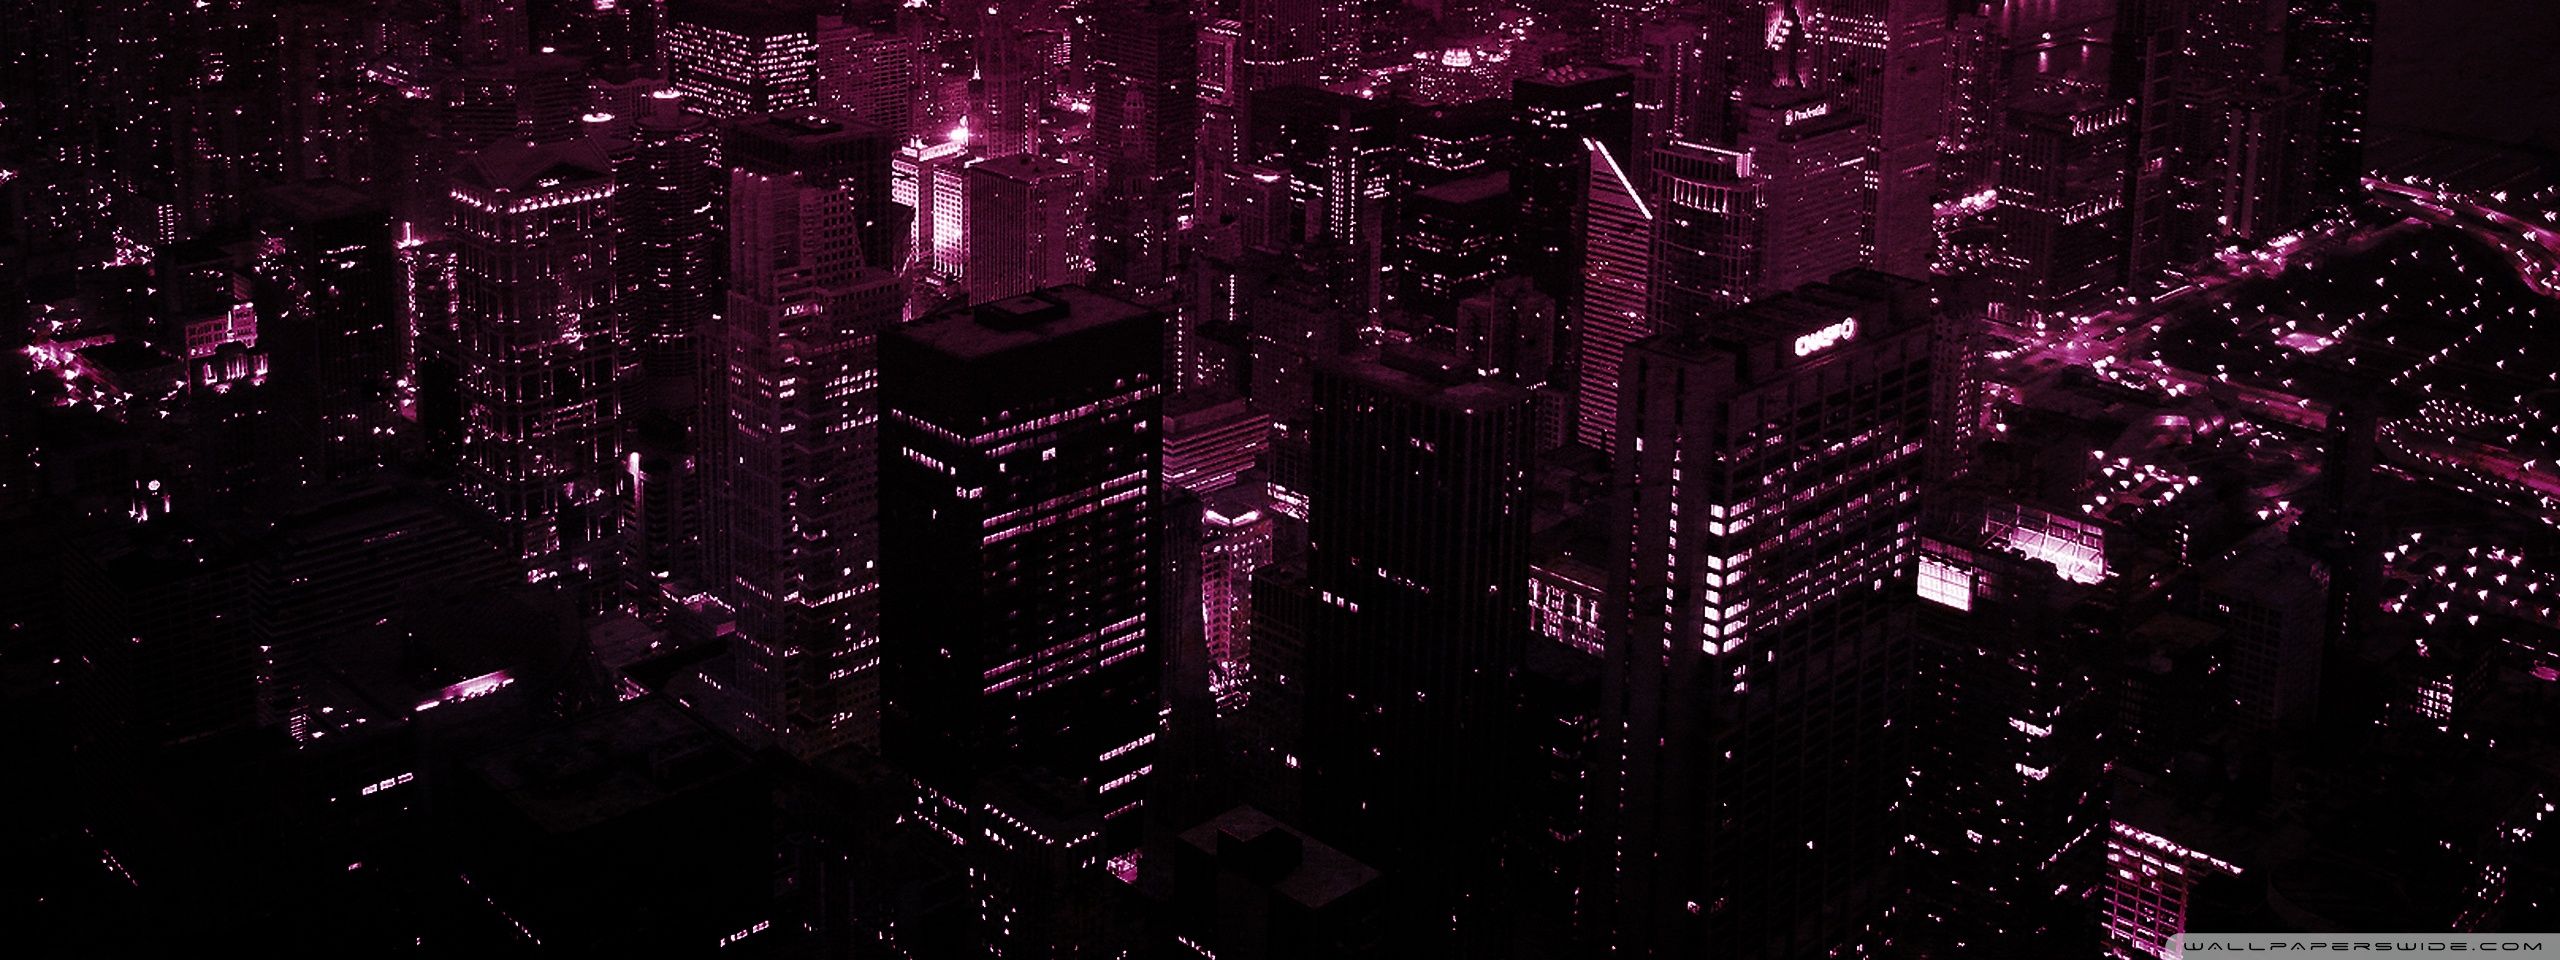 Building City Cityscape Futuristic Pink Skyscraper Synthwave HD Vaporwave  Wallpapers  HD Wallpapers  ID 79715